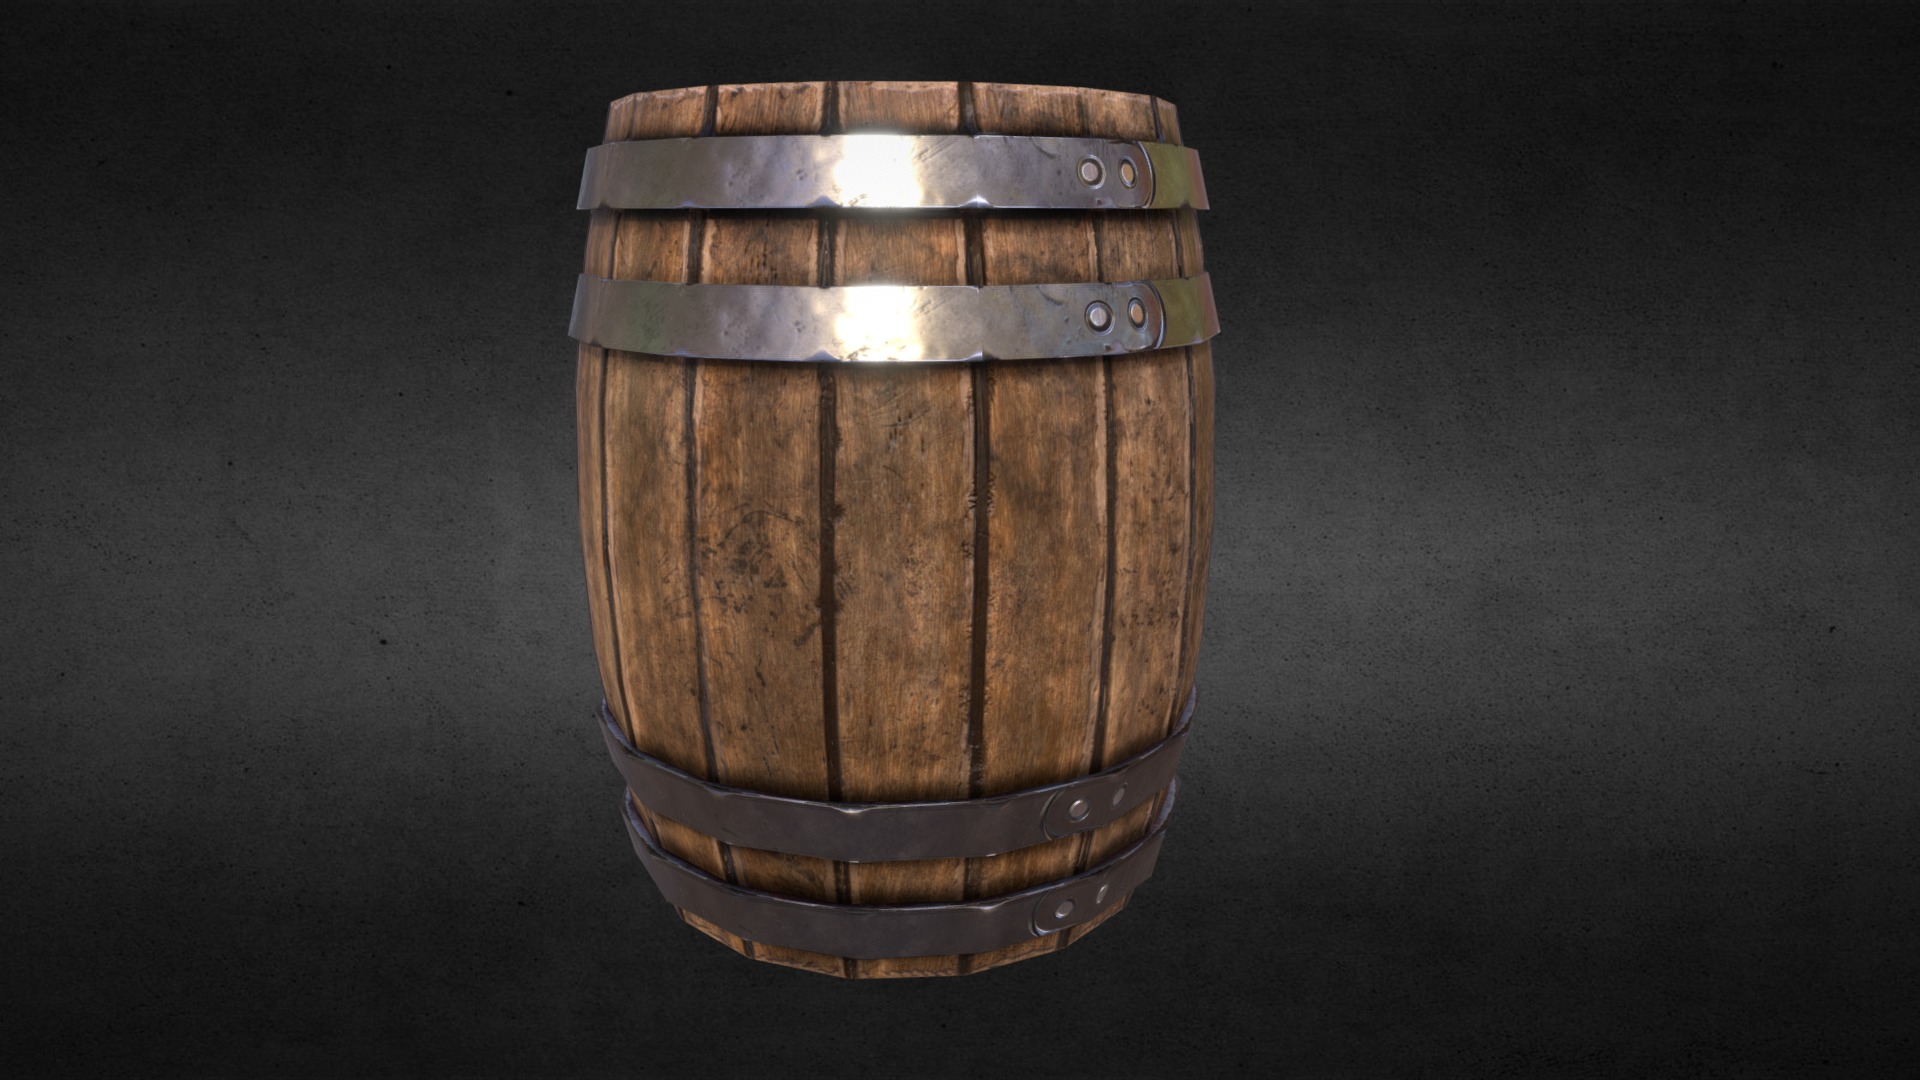 3D model Barrel - This is a 3D model of the Barrel. The 3D model is about a wooden barrel with a metal top.